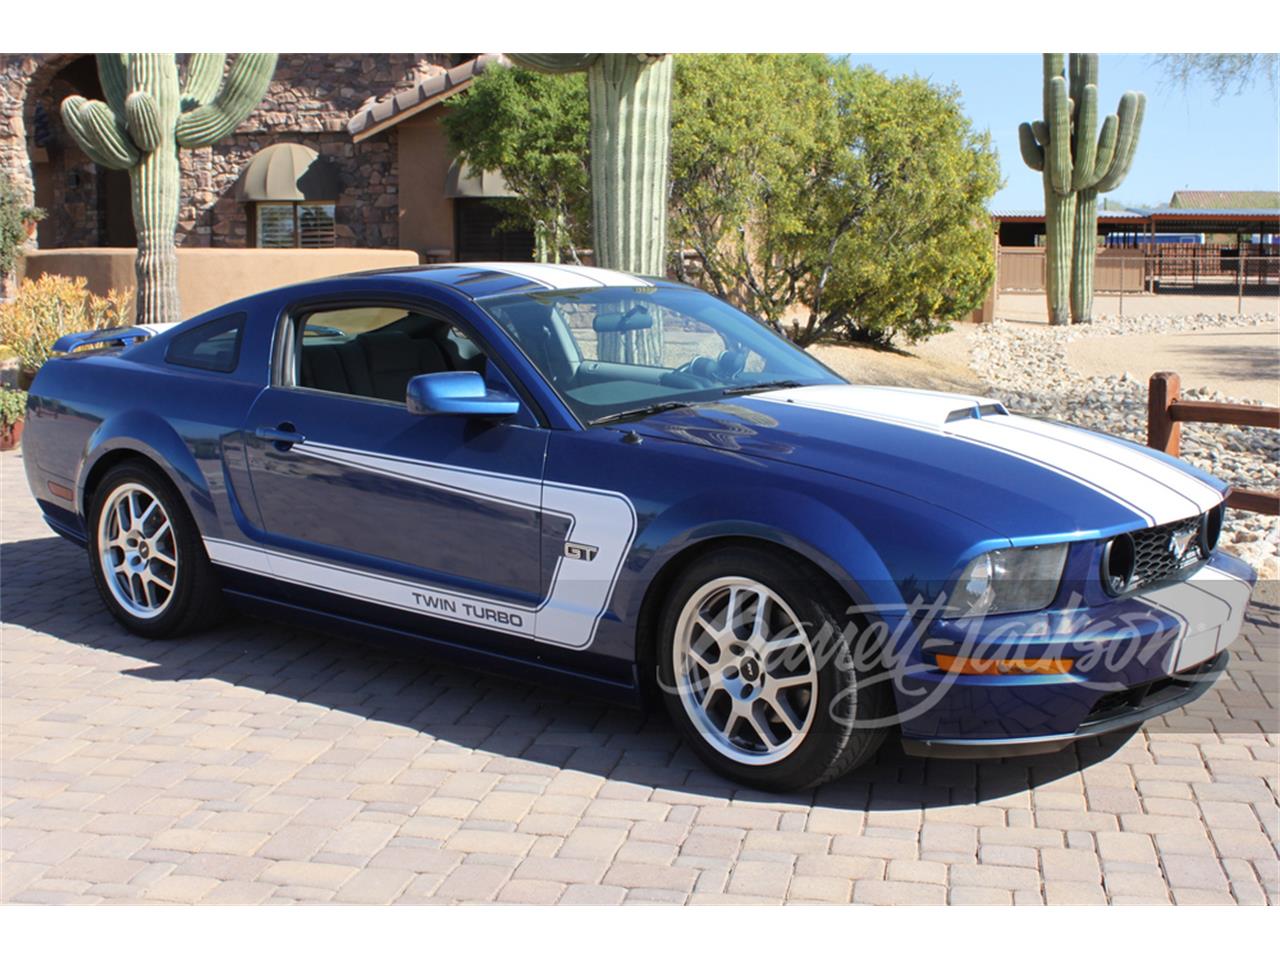 For Sale at Auction: 2006 Ford Mustang in Scottsdale, Arizona for sale in Scottsdale, AZ